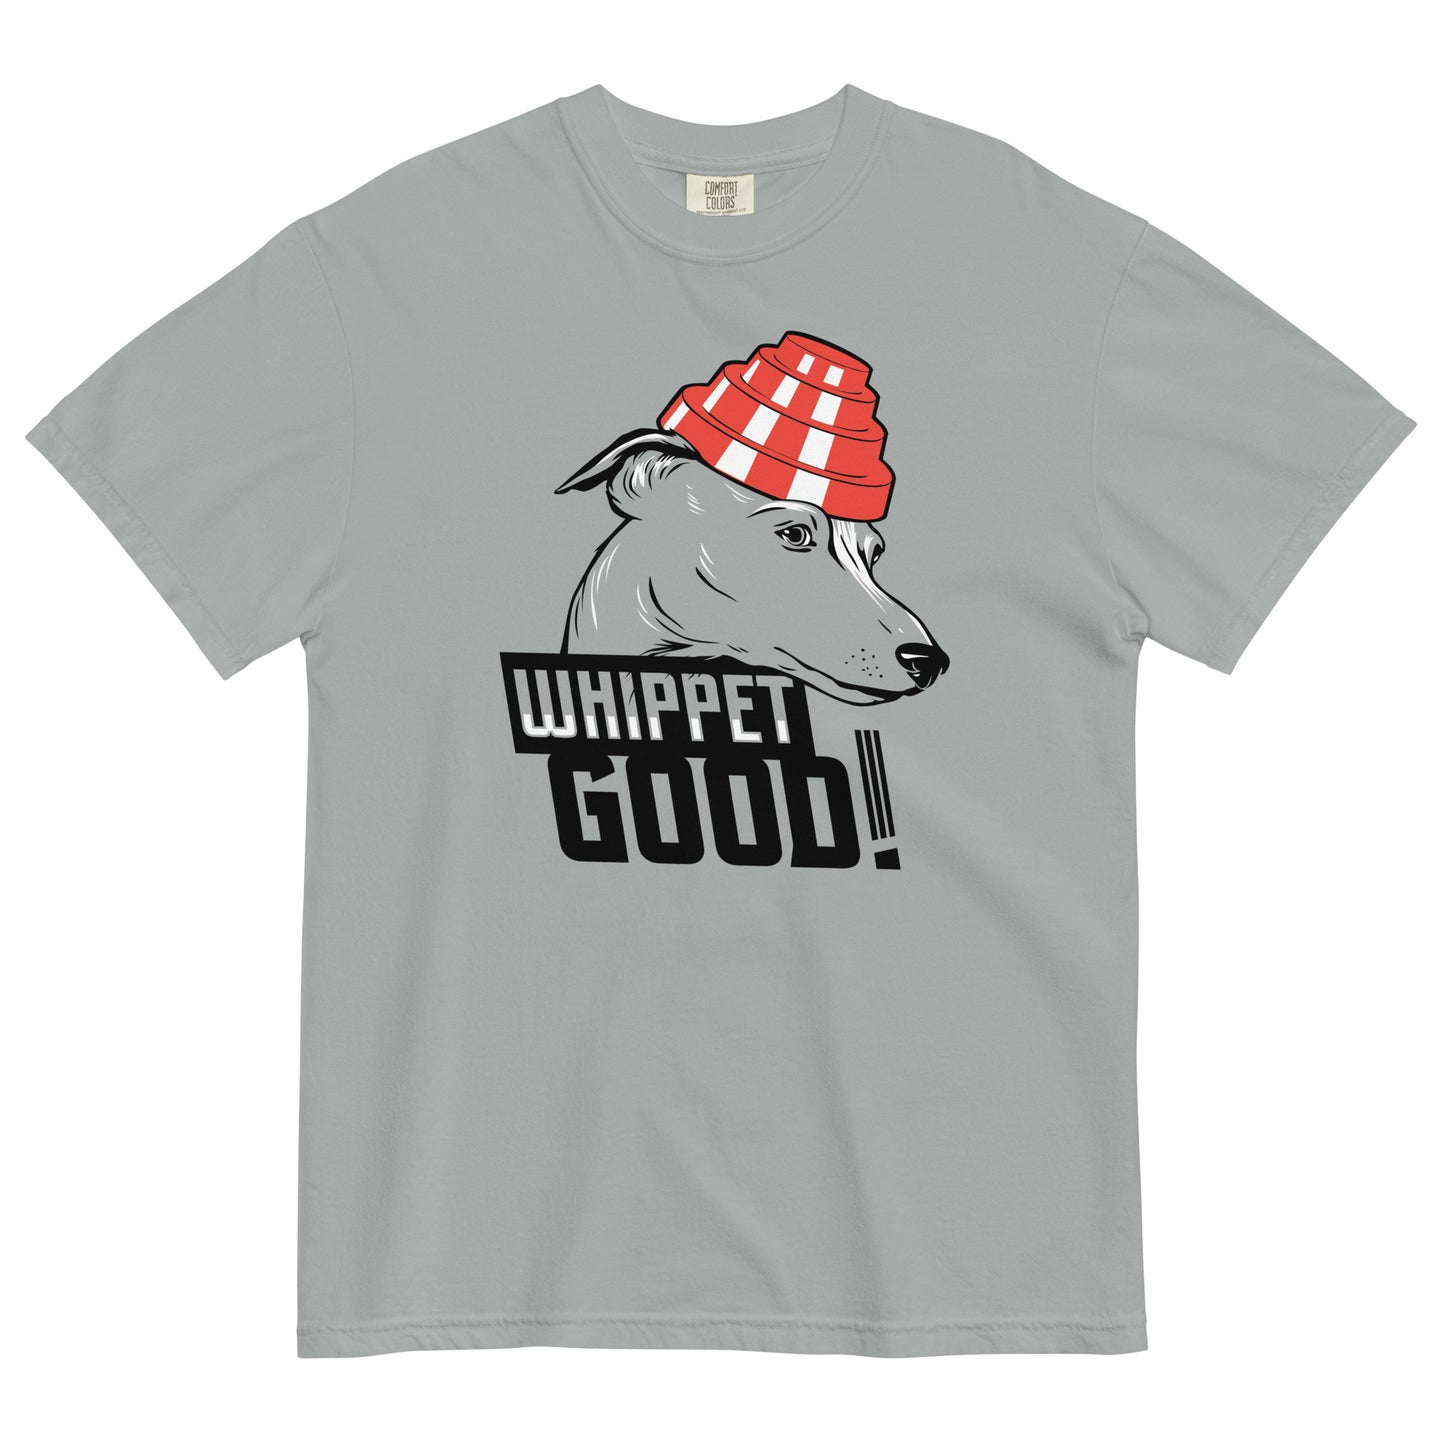 Whippet Good! Men's Relaxed Fit Tee